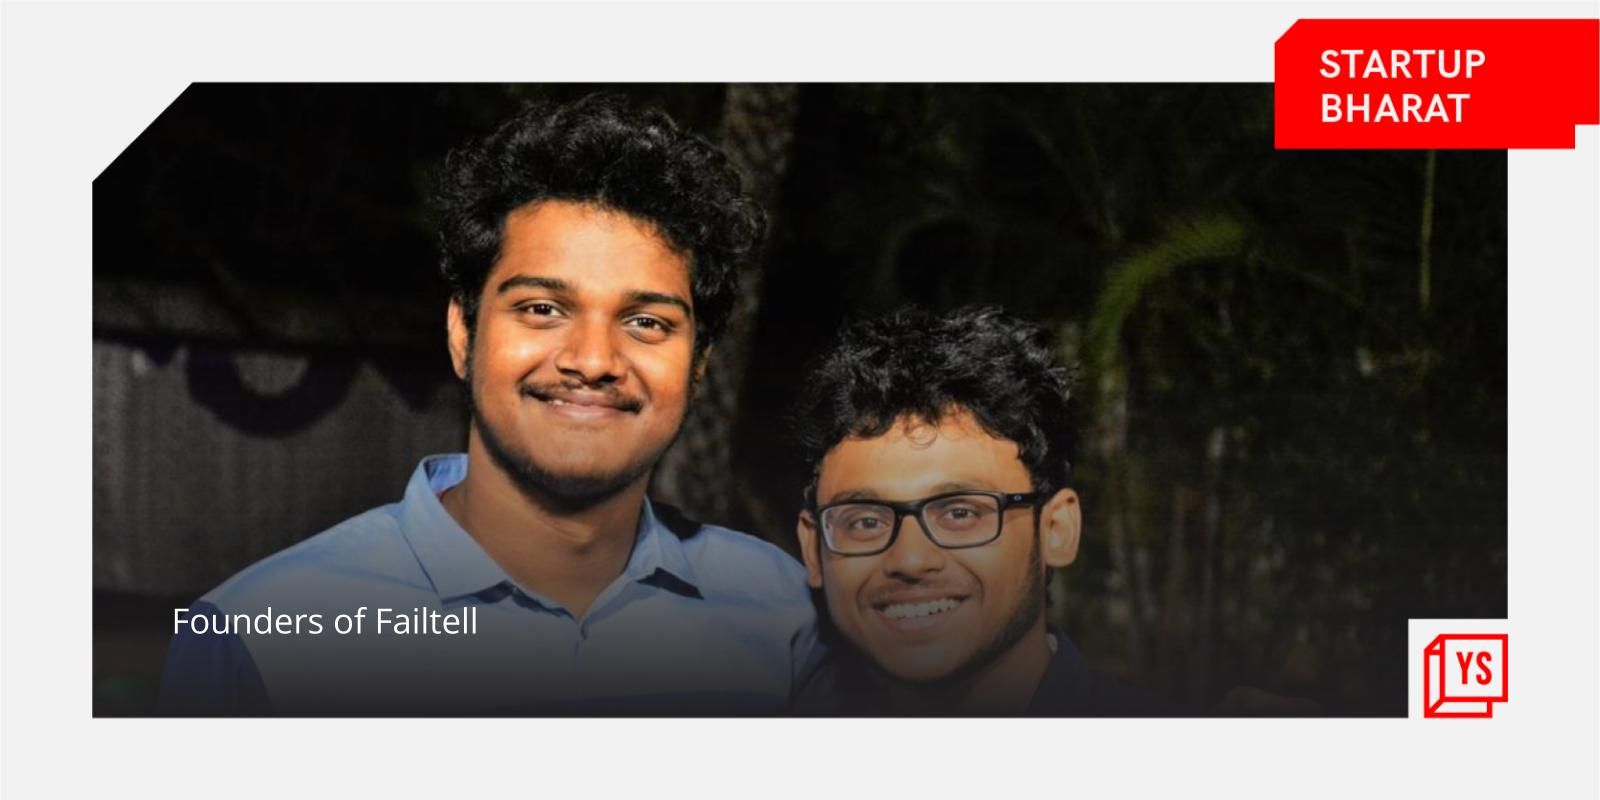 [Startup Bharat] How this Bhubaneshwar-based online platform is helping people deal with their mental health